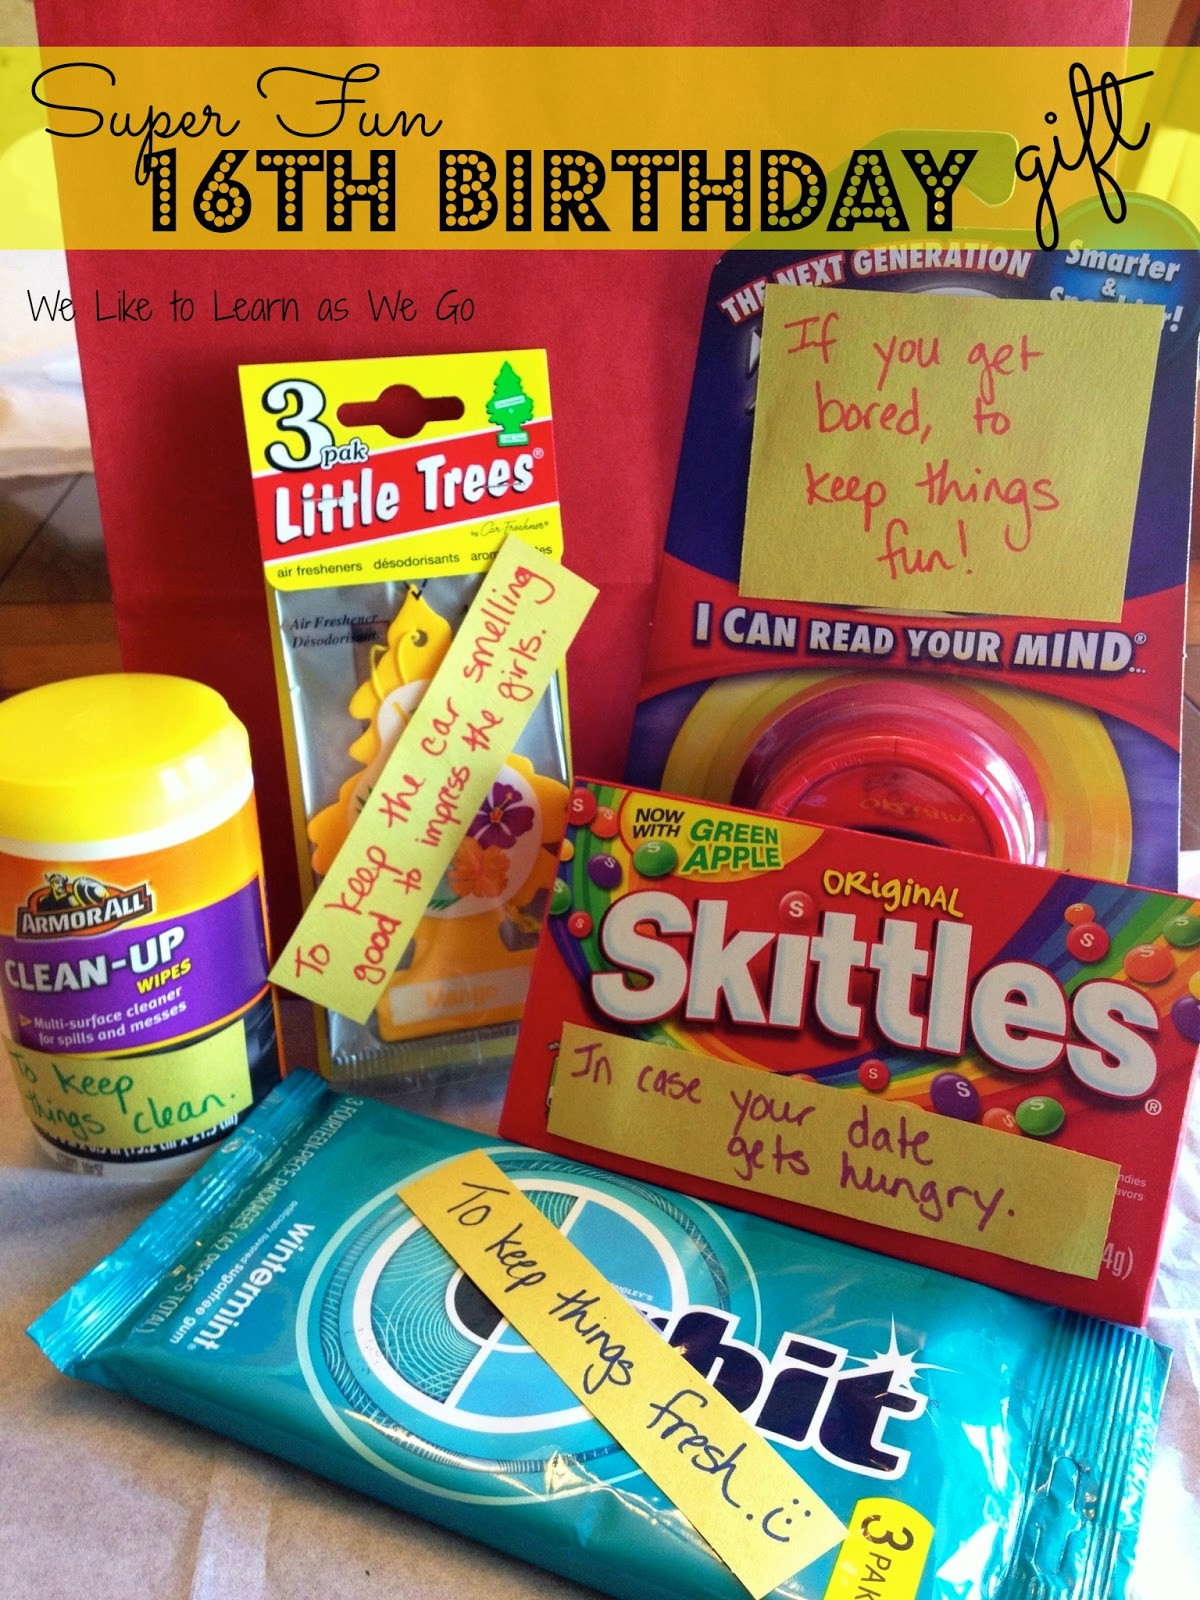 16th Birthday Gifts For Her
 Super Fun 16th Birthday Gift Learn as We Go